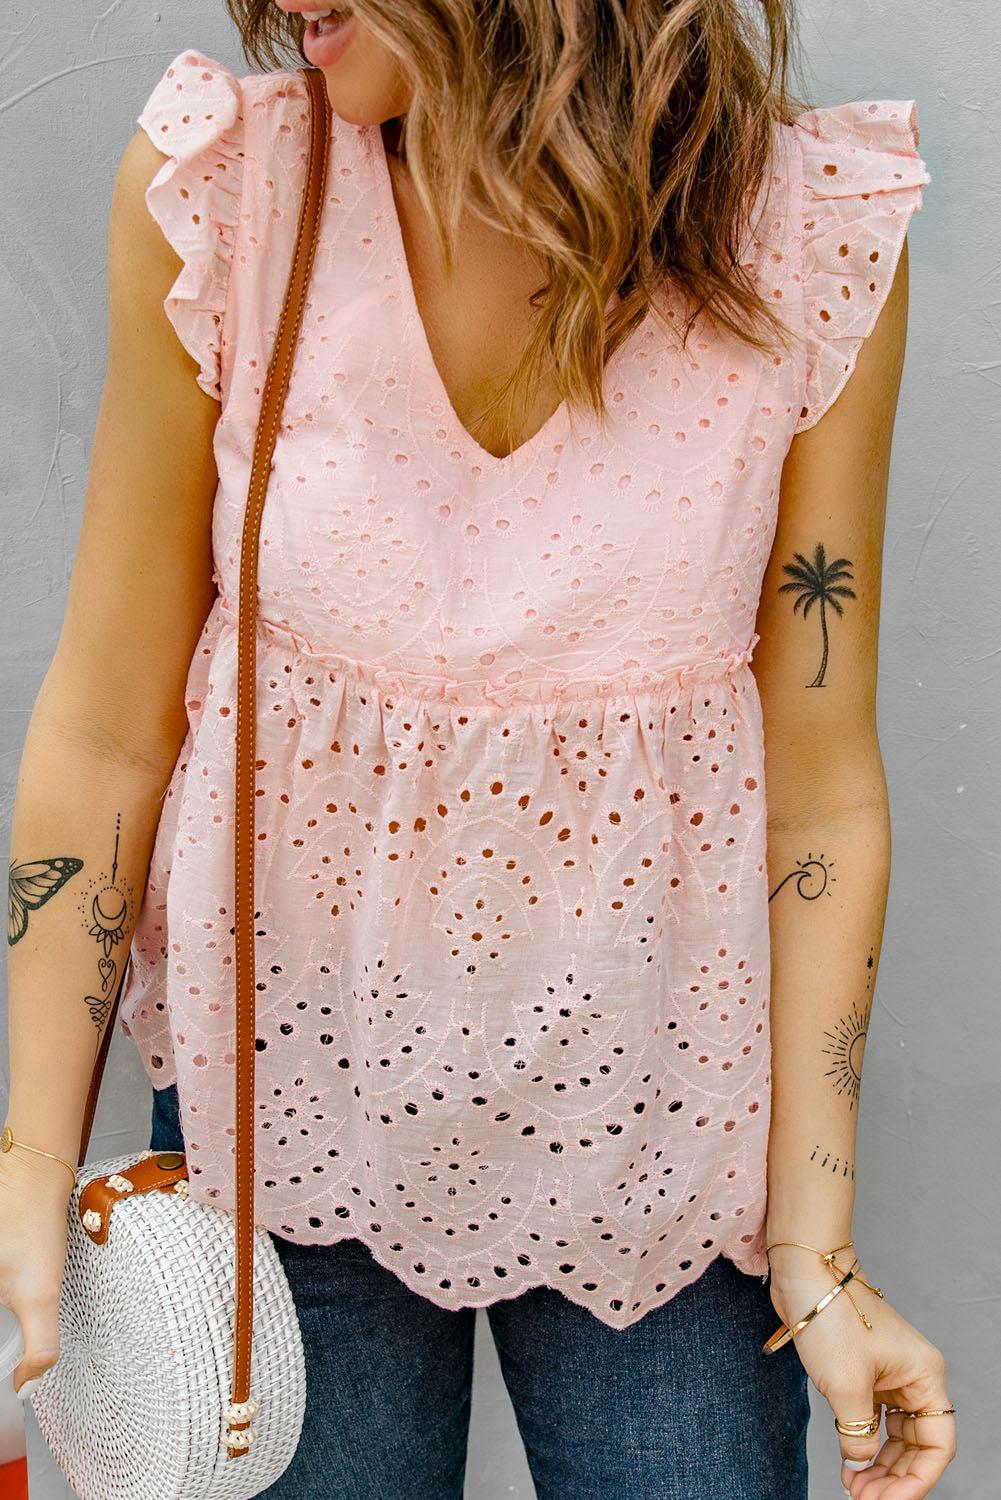 Eyelet Lace Scalloped Tank Top